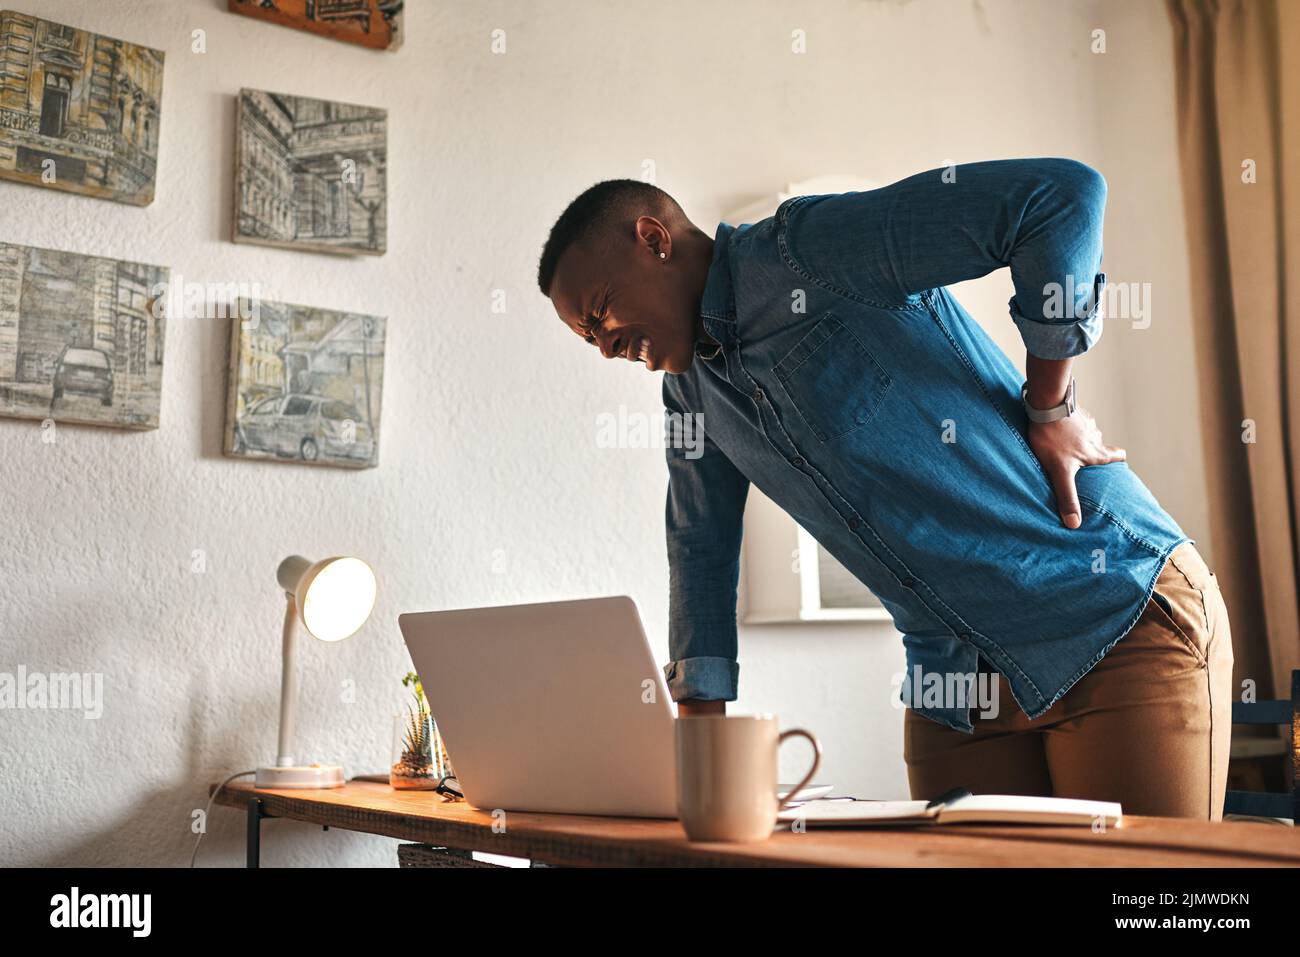 Back pain, ache and sore body with a business man suffering from bad posture. Feeling hurt with cramp or stiff spine from being overworked. Young male Stock Photo